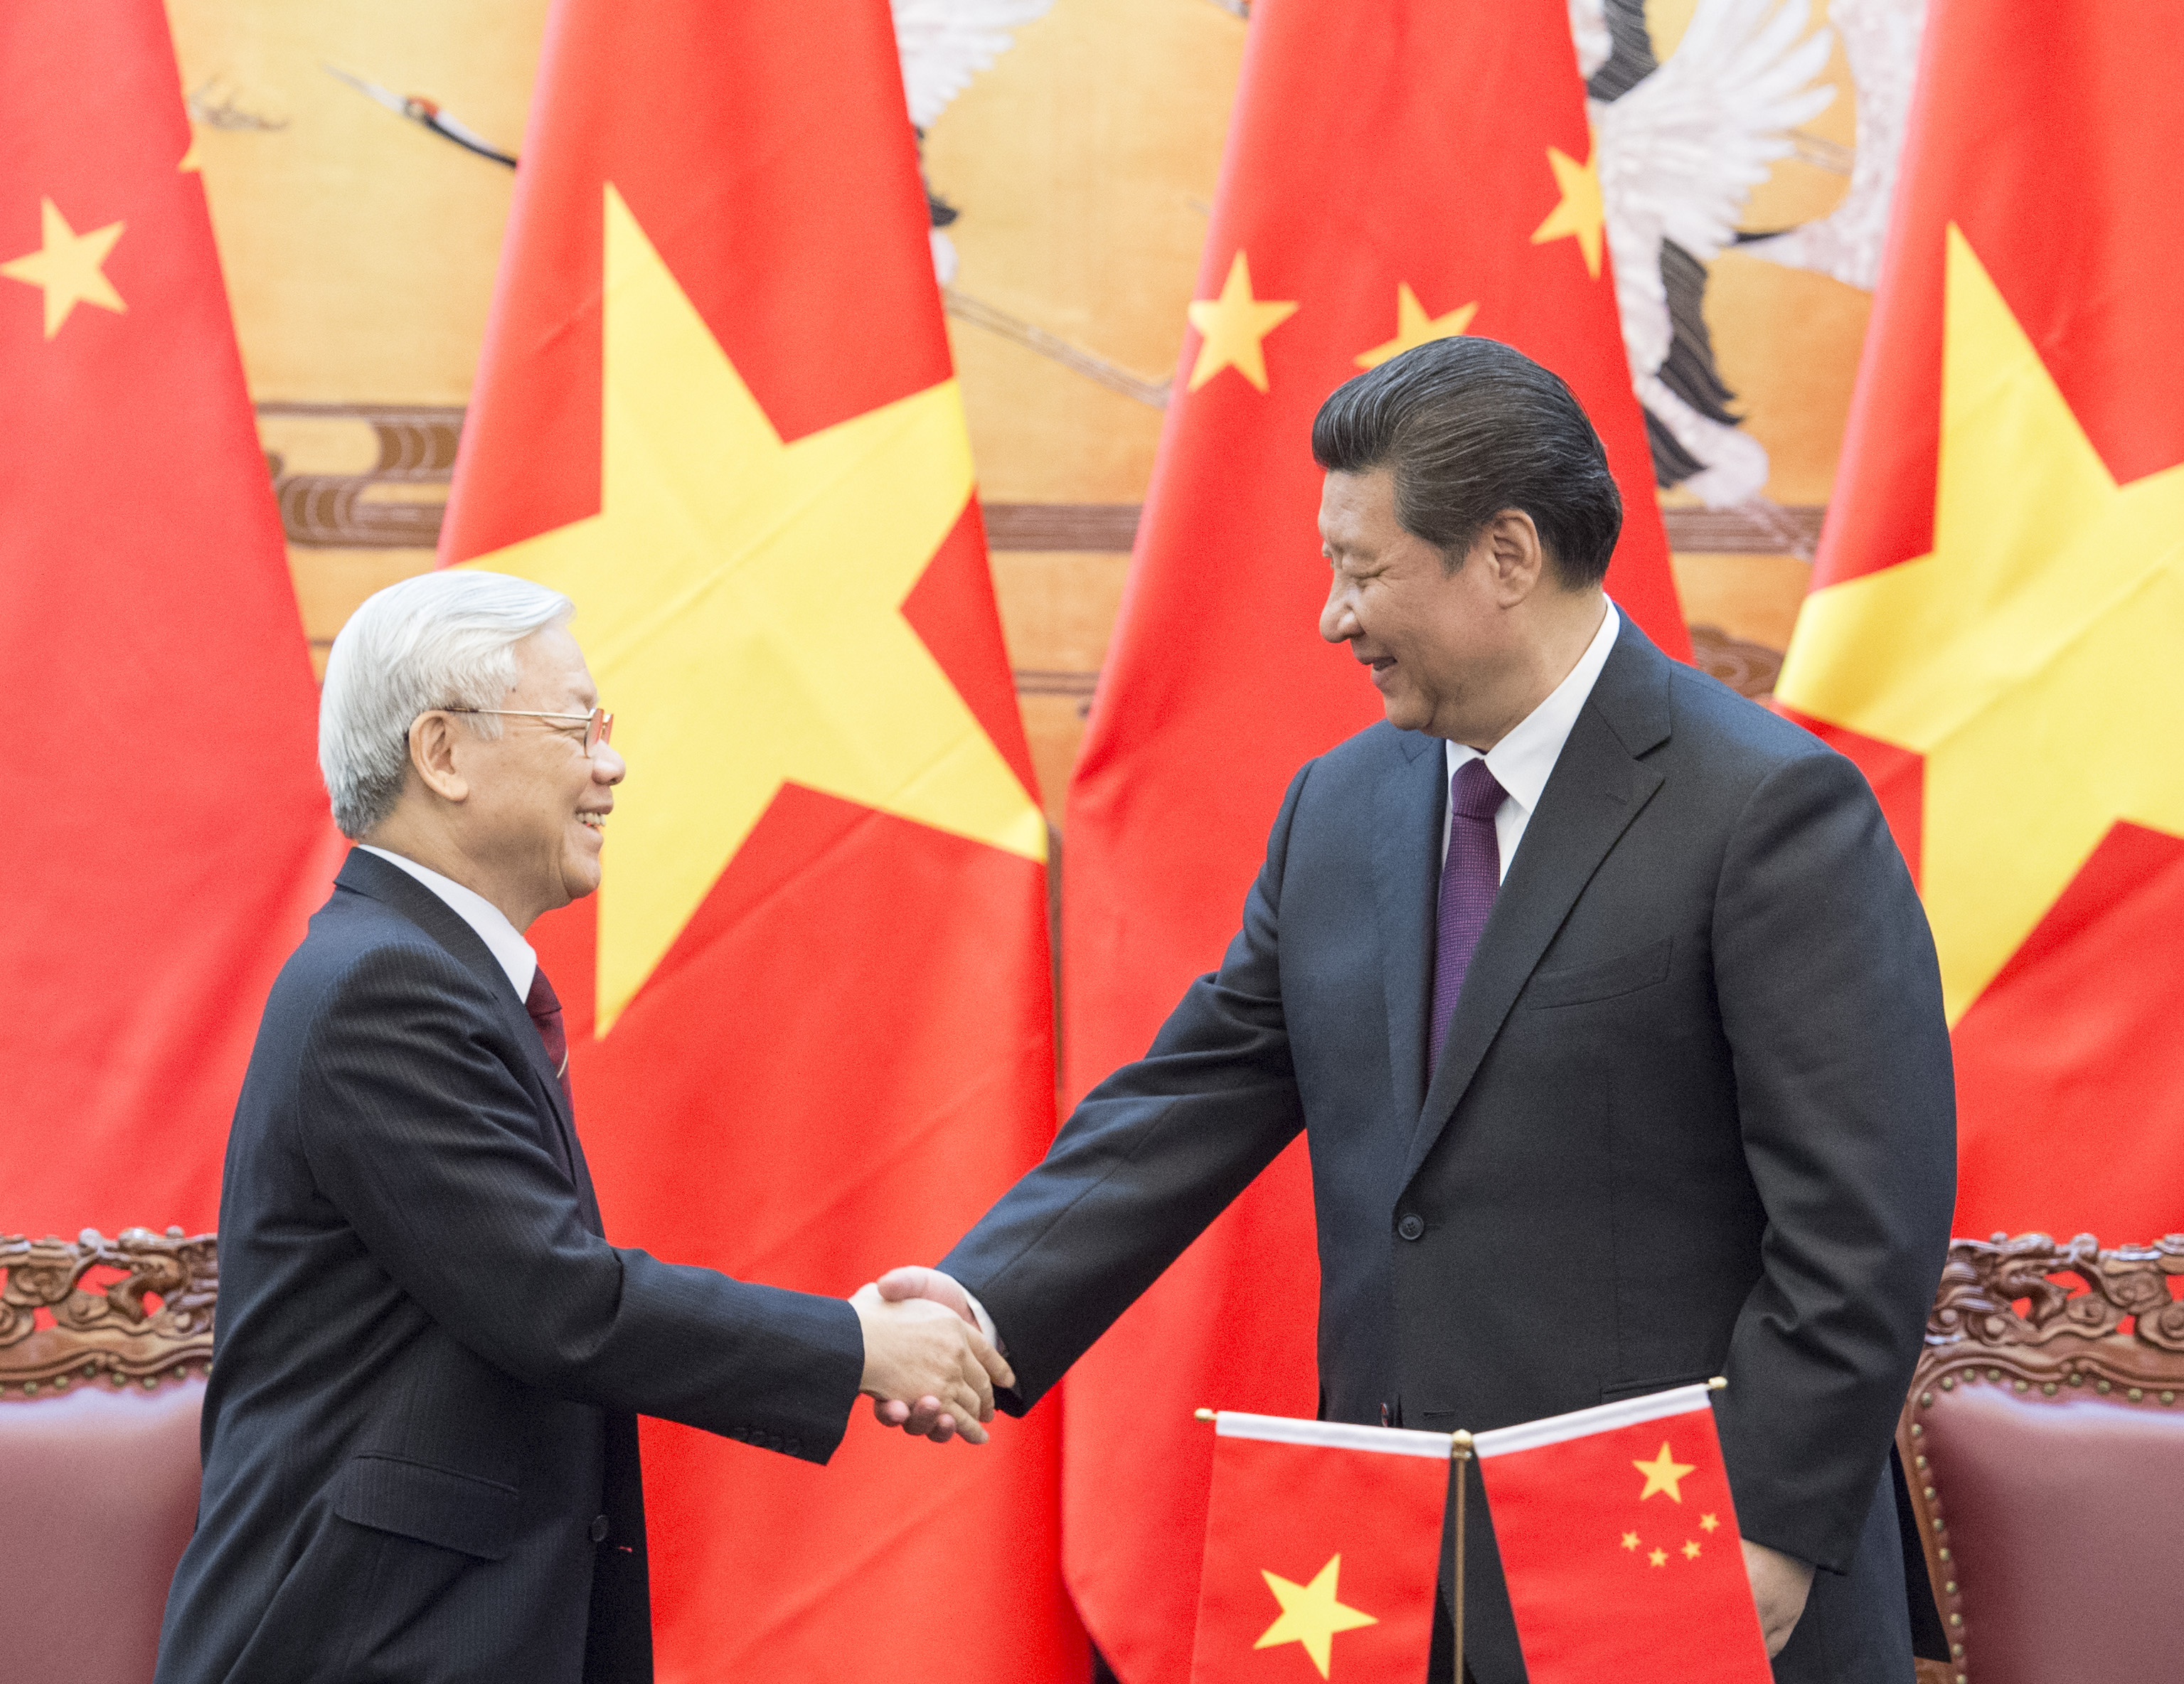 President Xi Jinping (right), who is also the Chinese  Communist Party's general secretary, attends a signing ceremony with Nguyen Phu Trong, general secretary of Vietnam's Communist Party, after their talks in Beijing on Tuesday. Photo: Xinhua